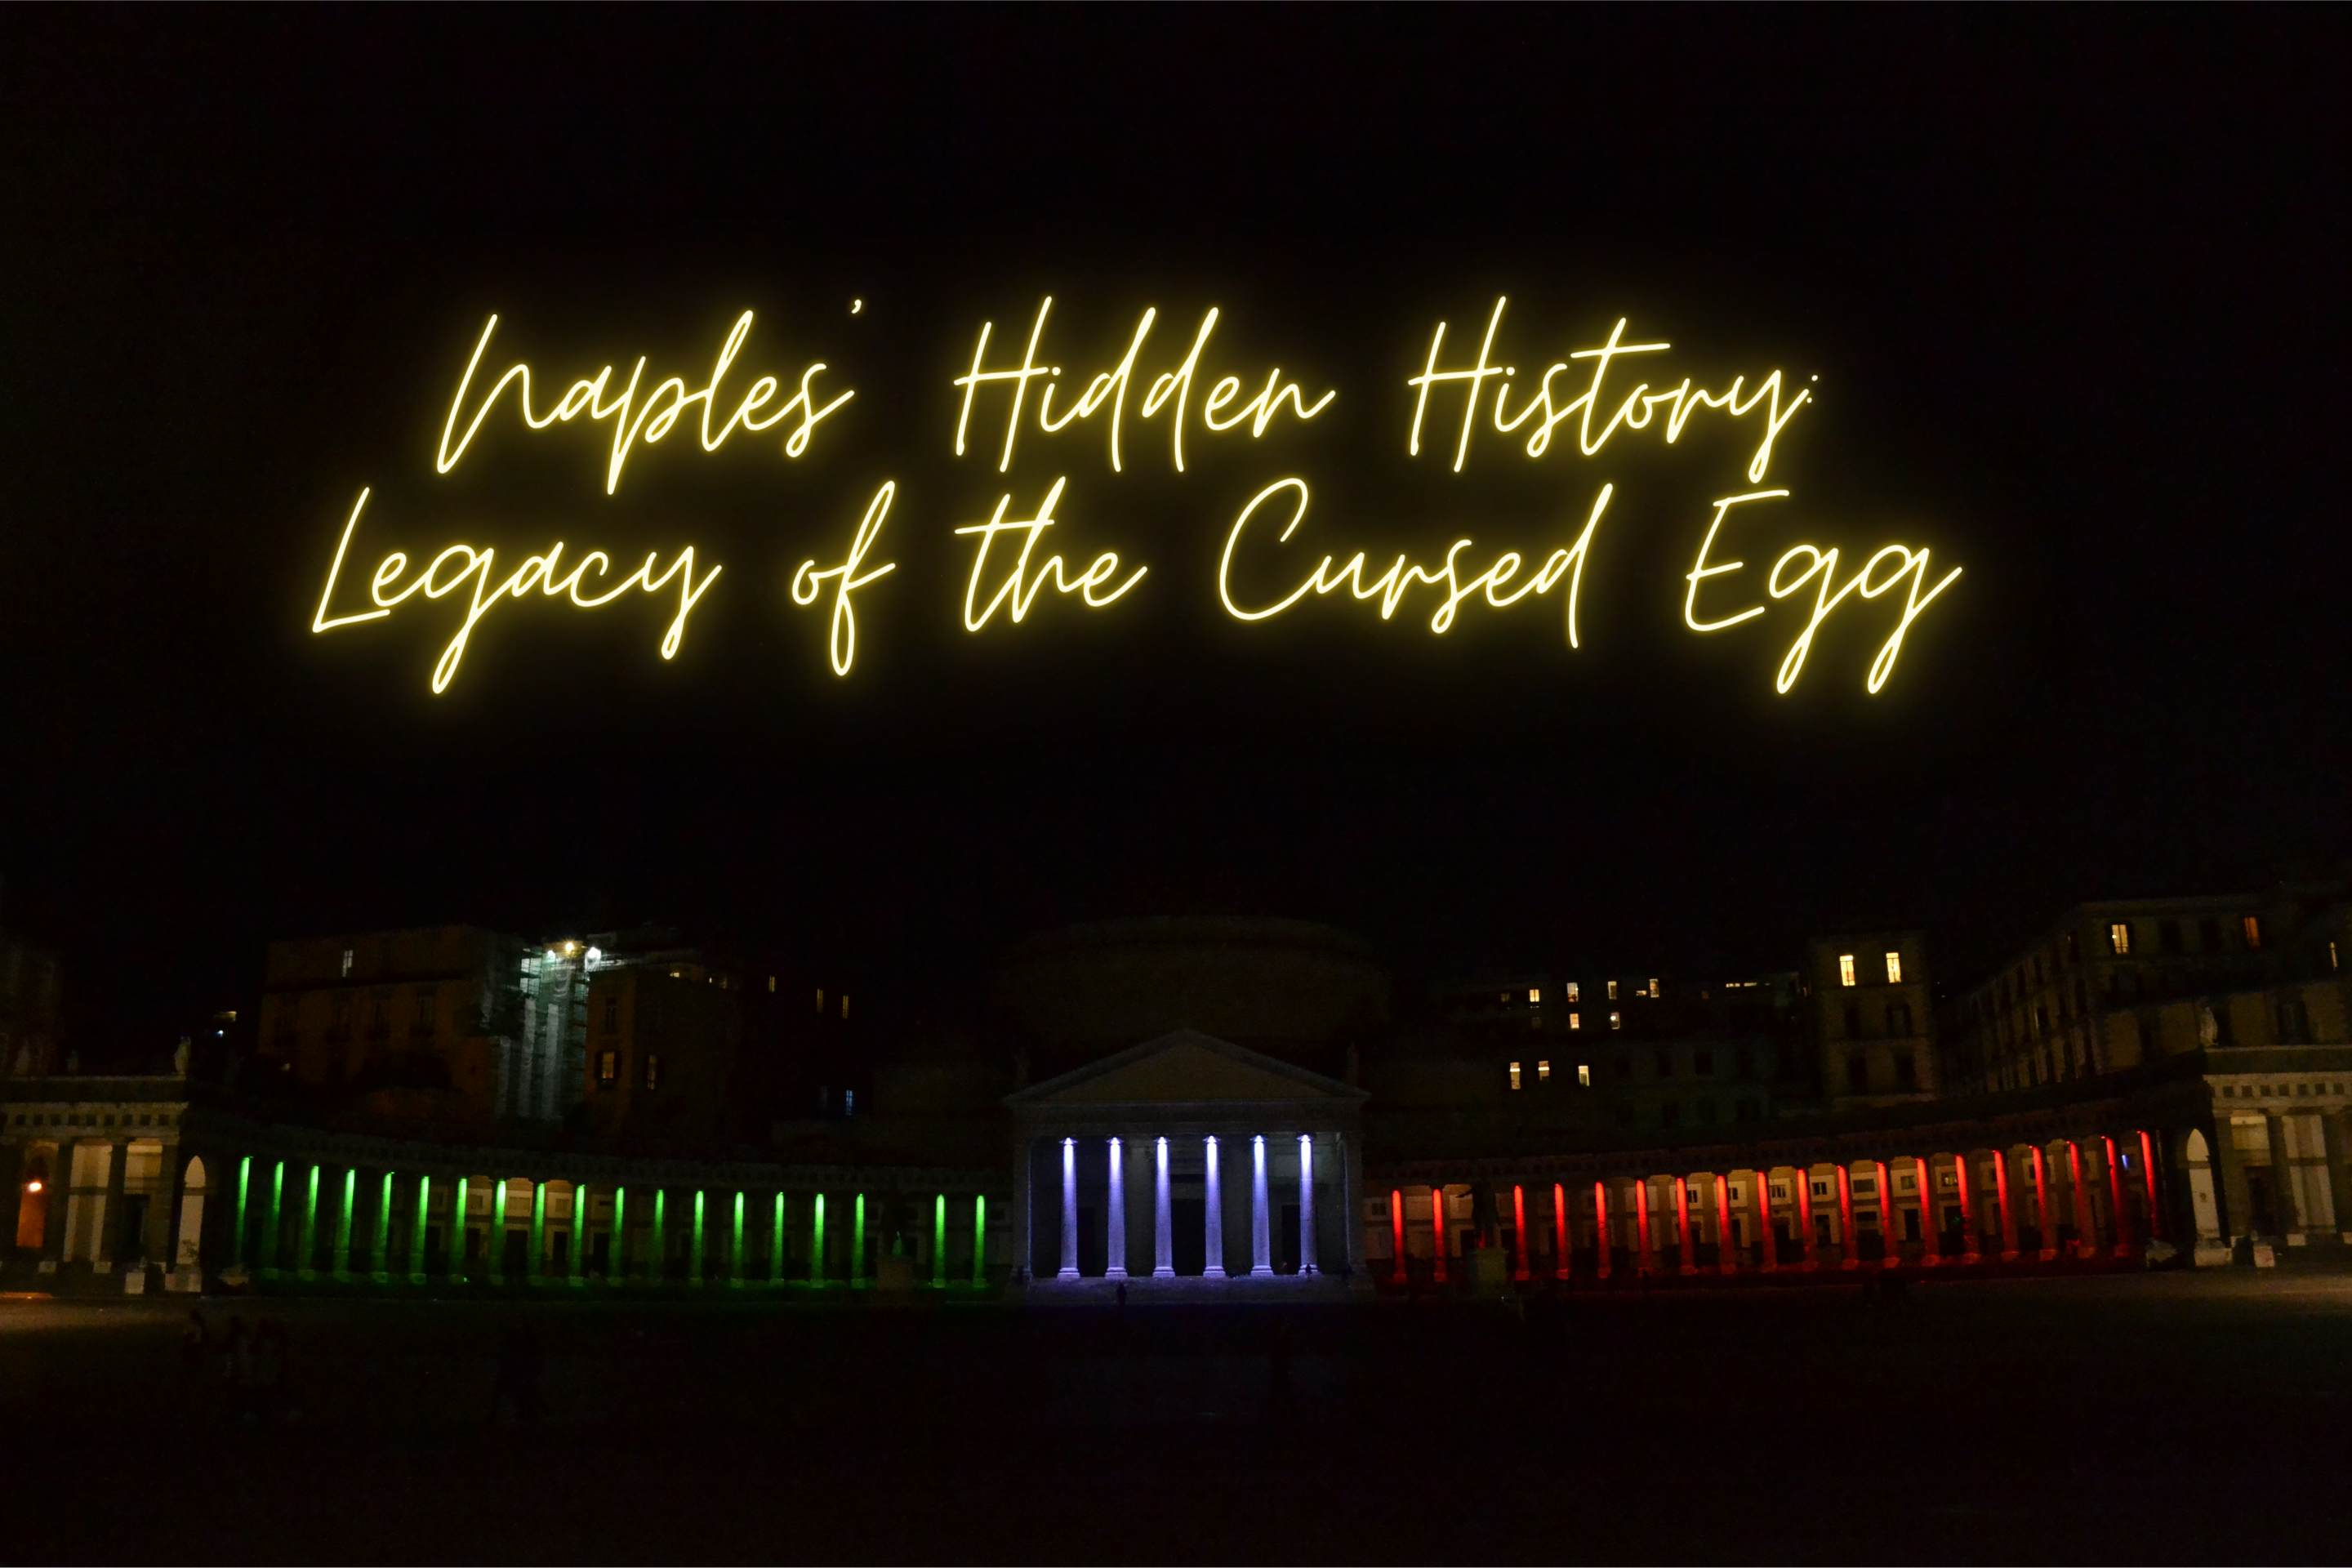 Naples' Hidden History: Legacy of the Cursed Egg image